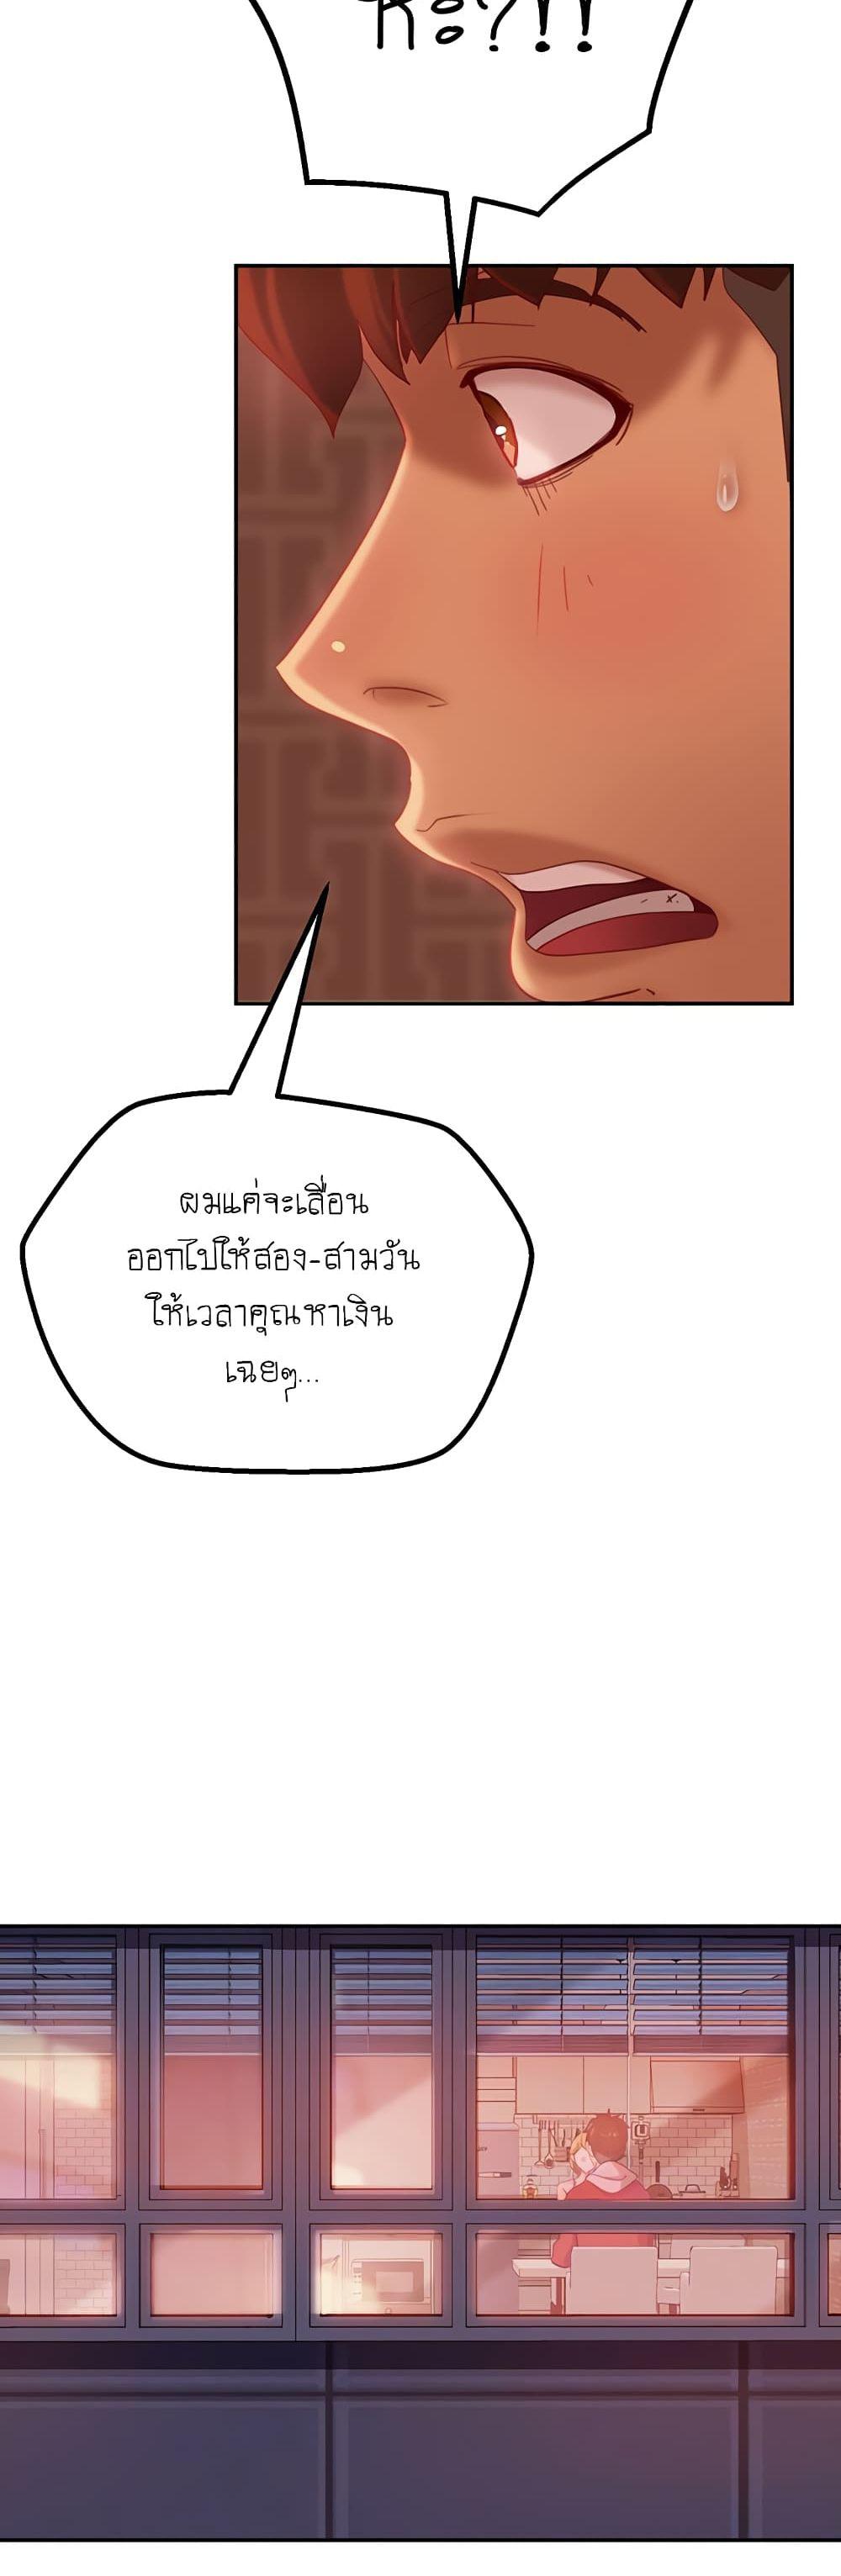 A Twisted Day 4 ภาพ 13